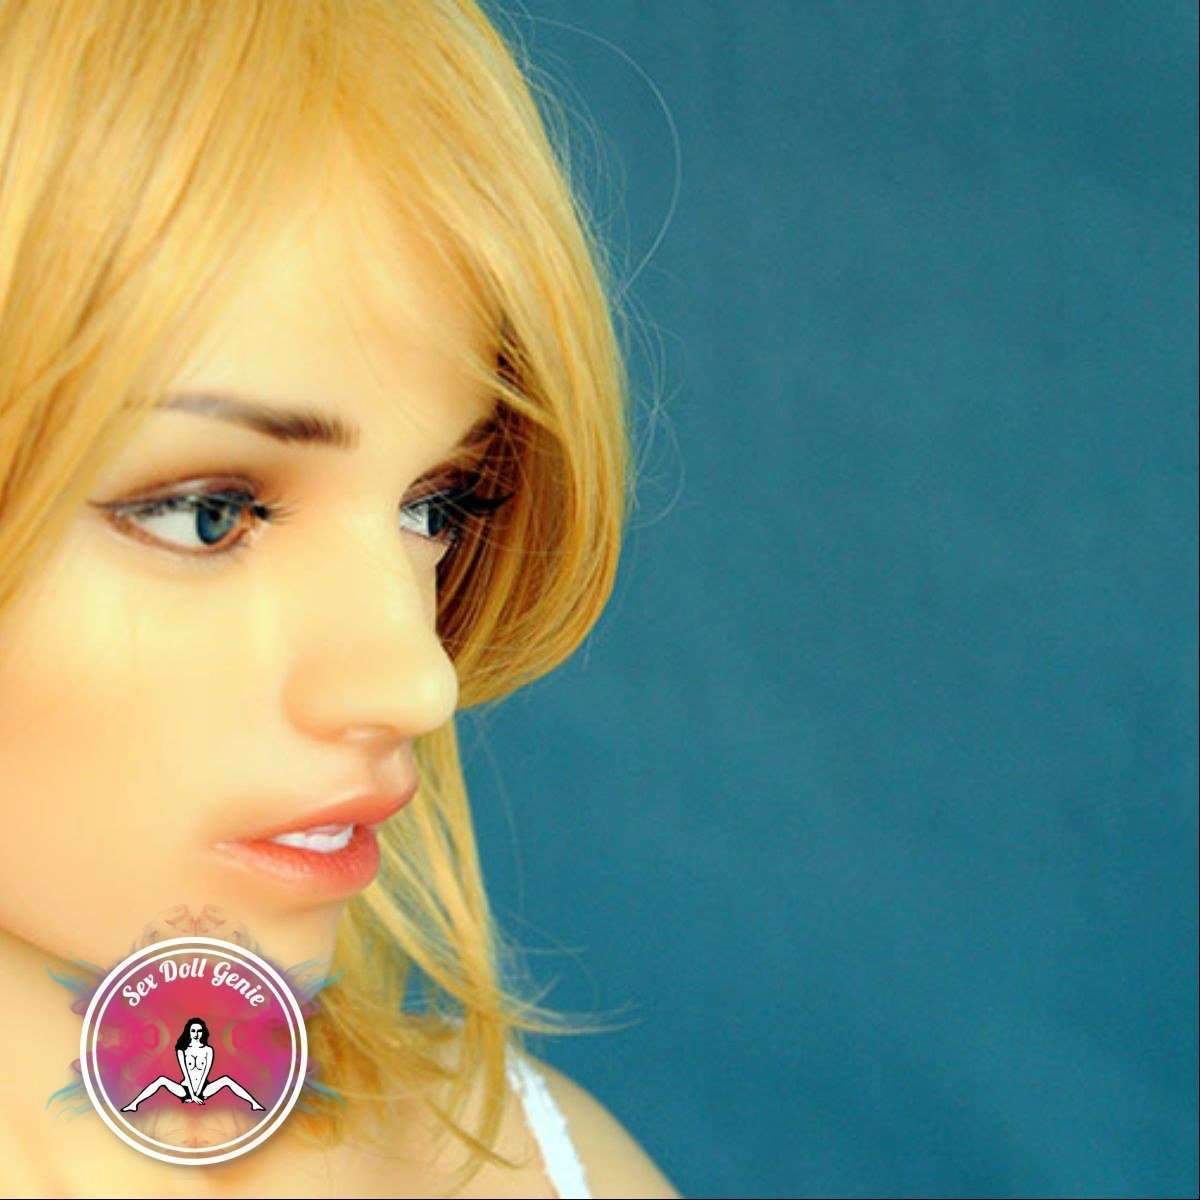 DS Doll - 158cm - Mandy Head - Type 1 D Cup Silicone Doll-12